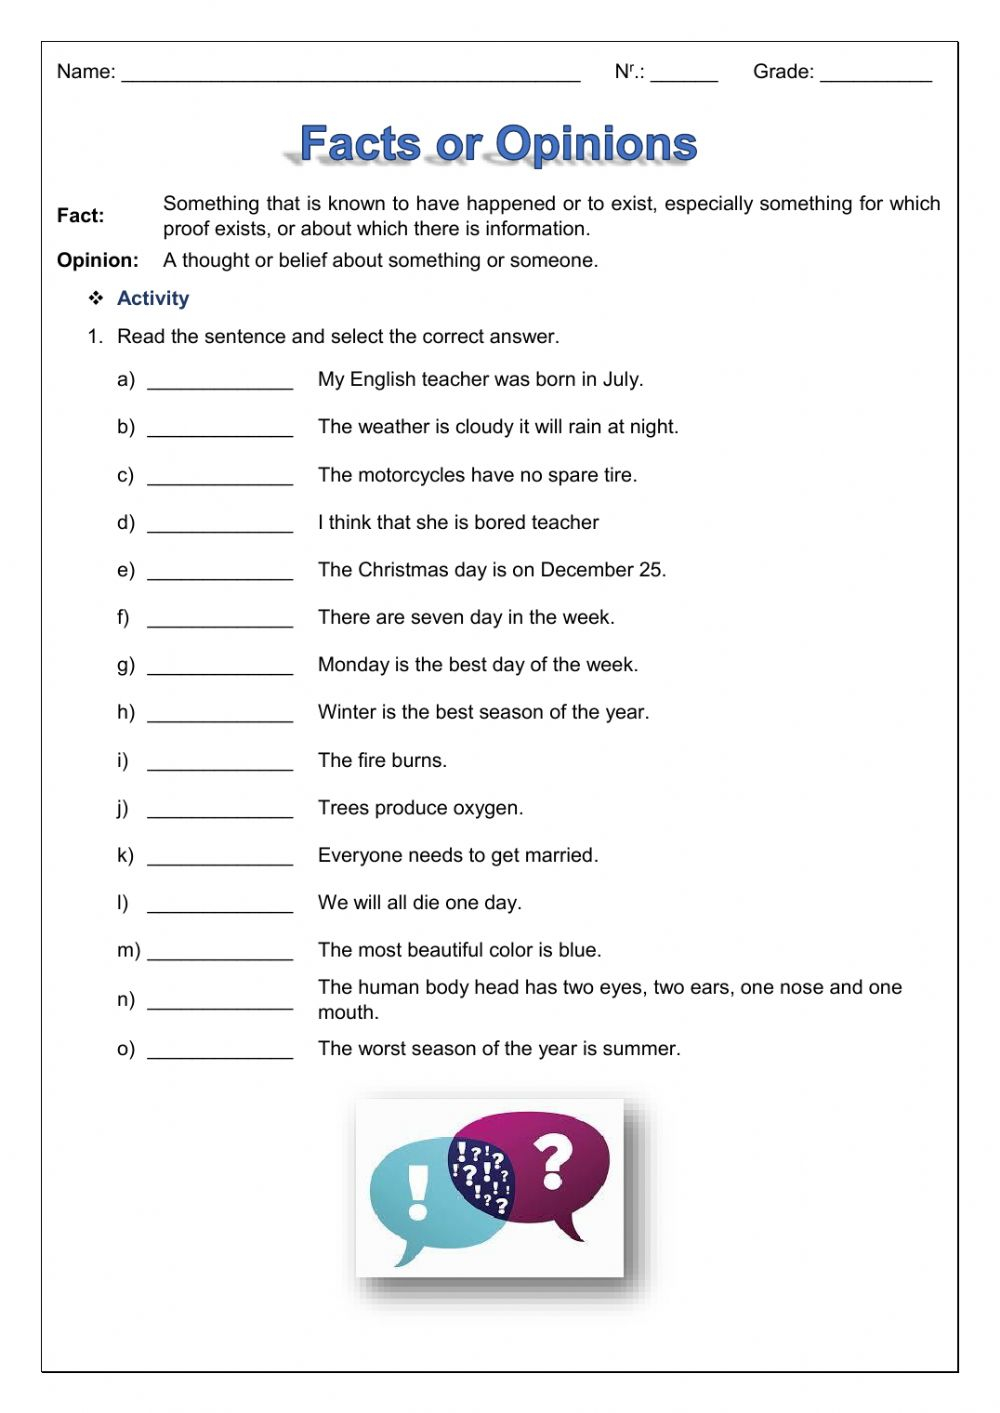 Facts Or Opinions Worksheet